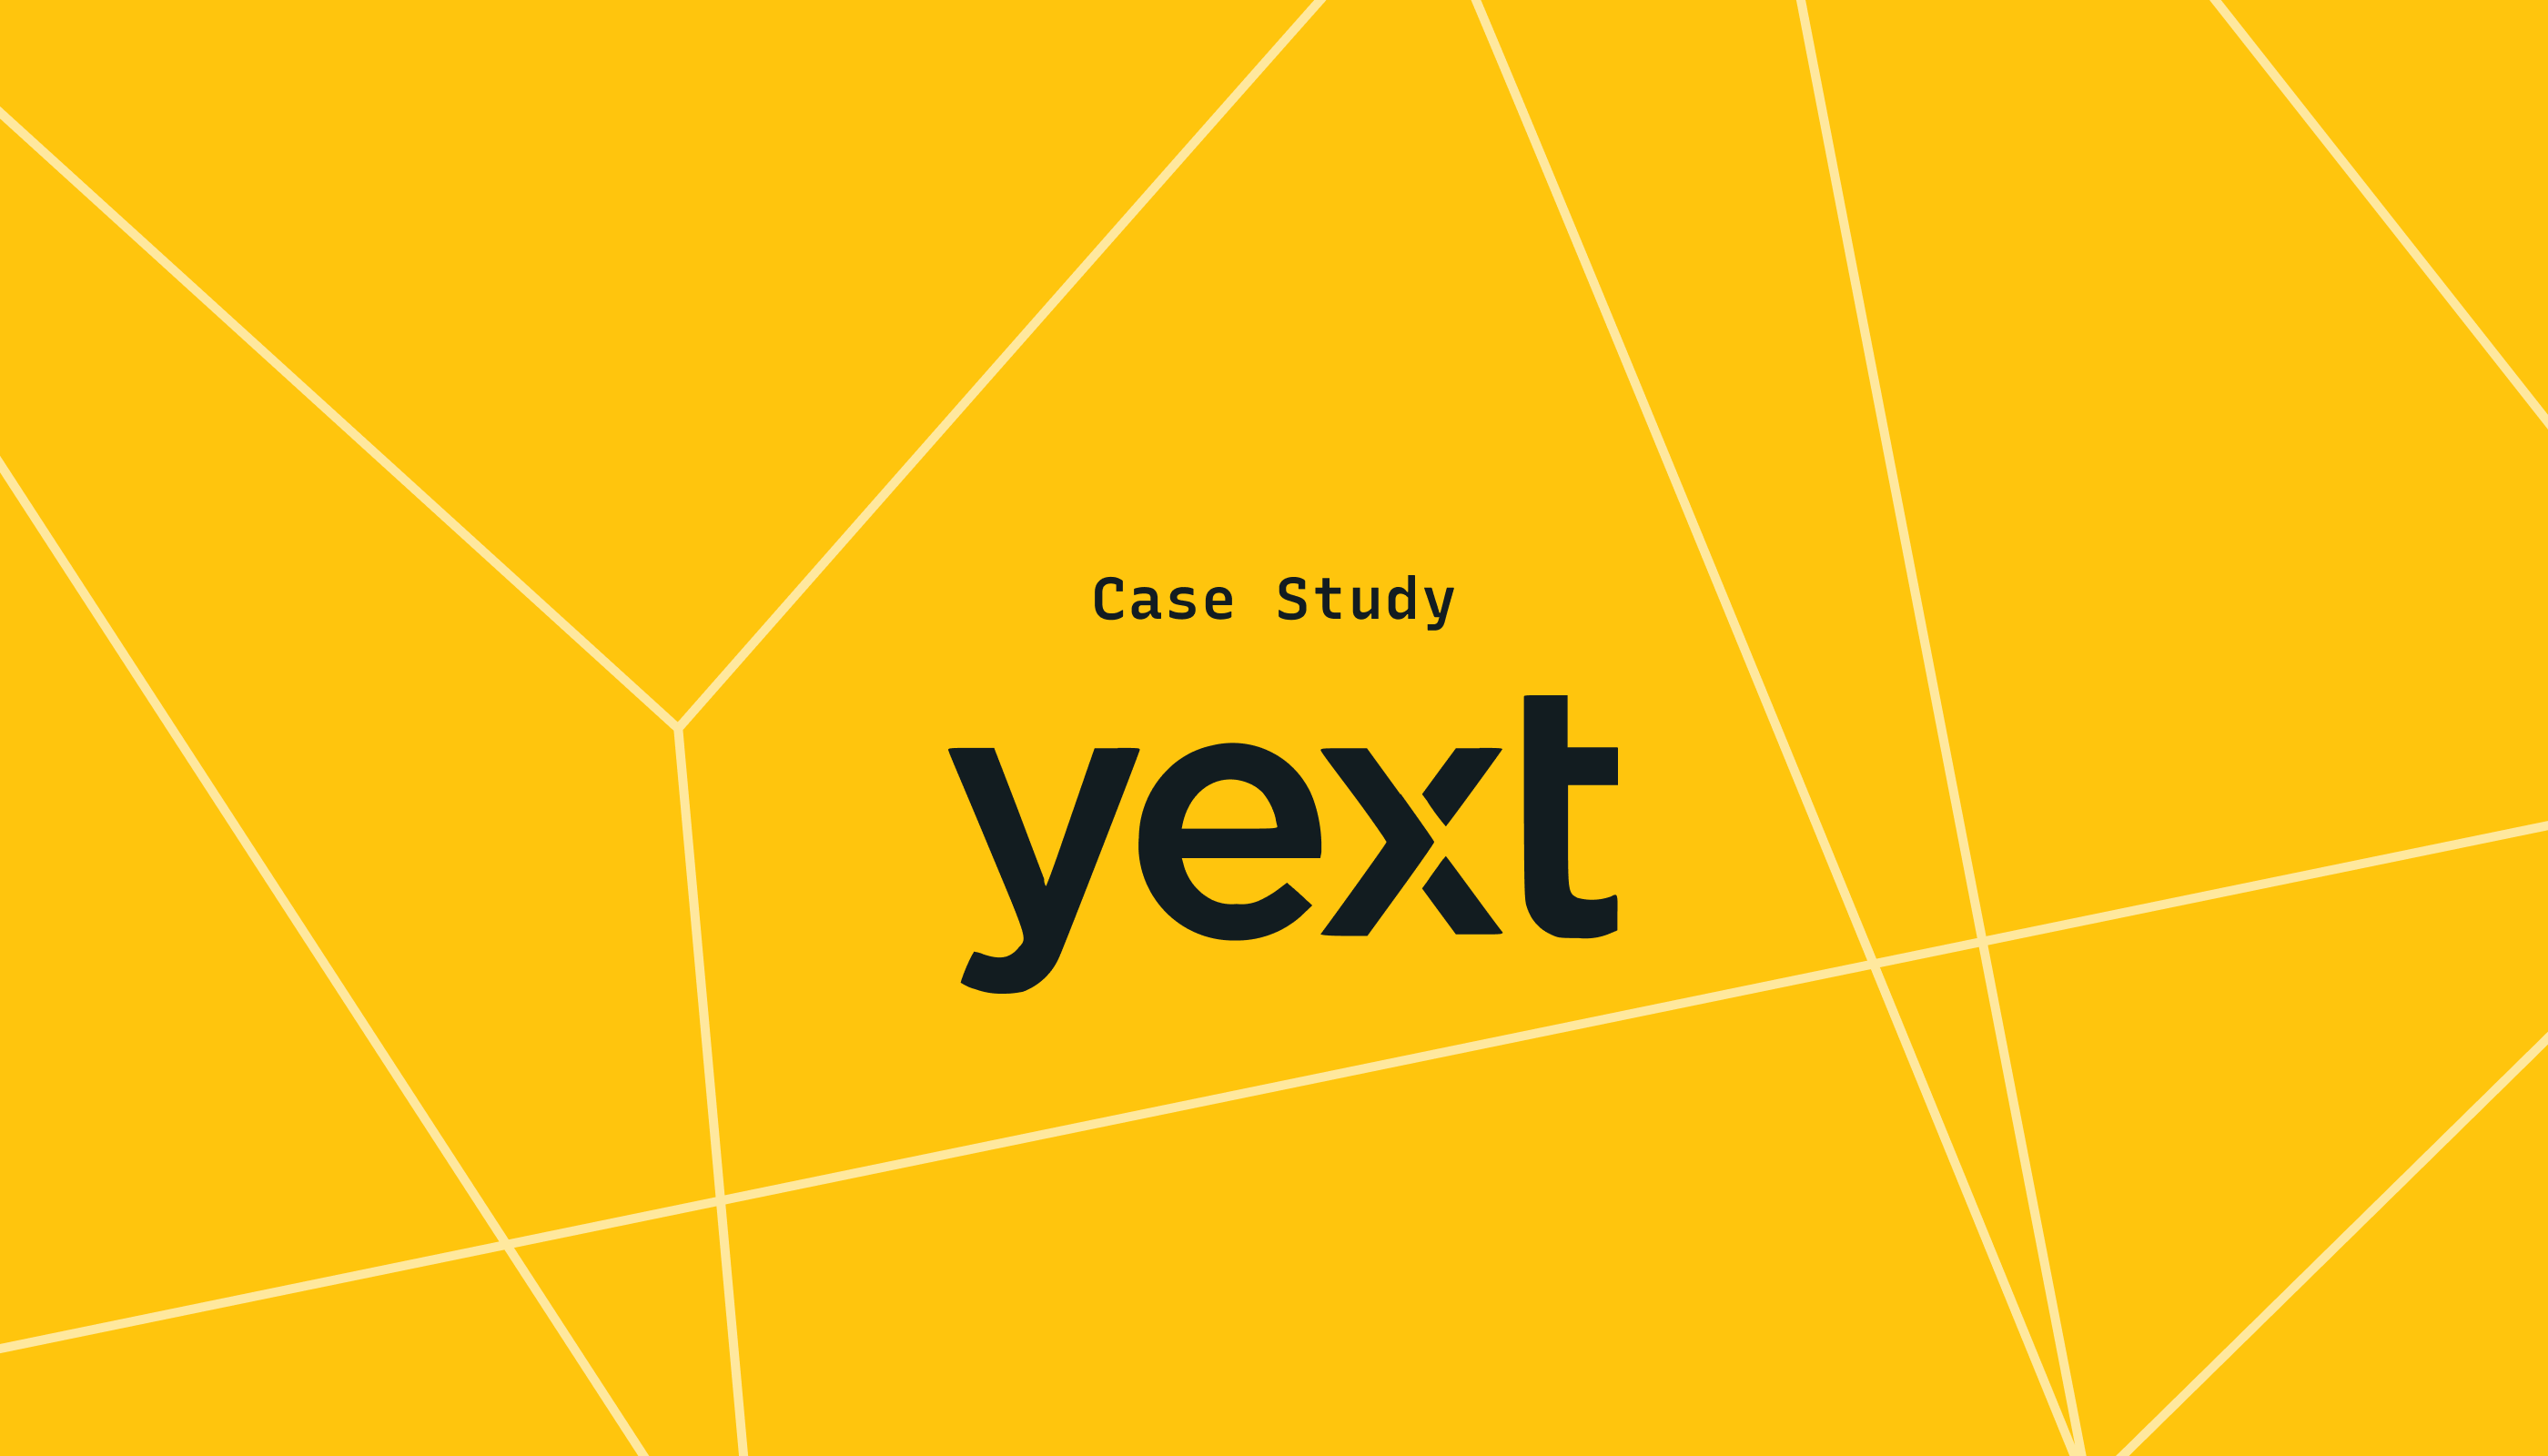 Yext moves to Lightstep, improving application performance